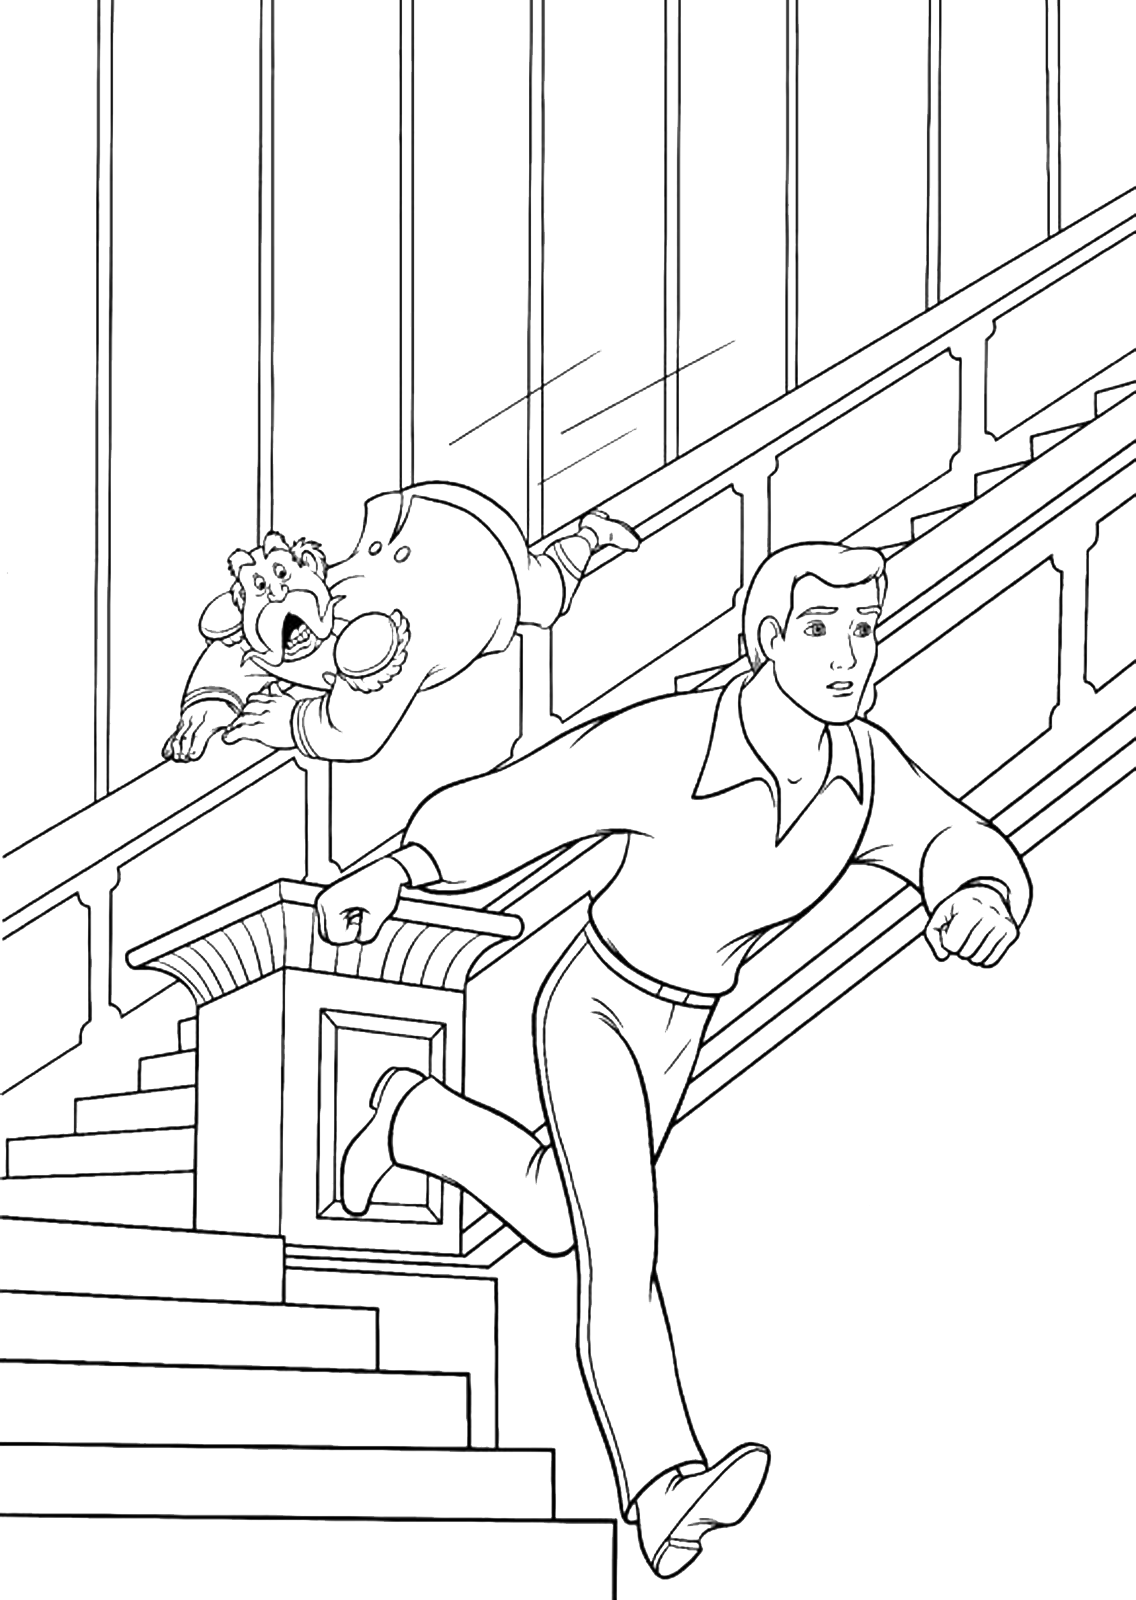 Cinderella - The King throws himself down the stairs to stop the Prince